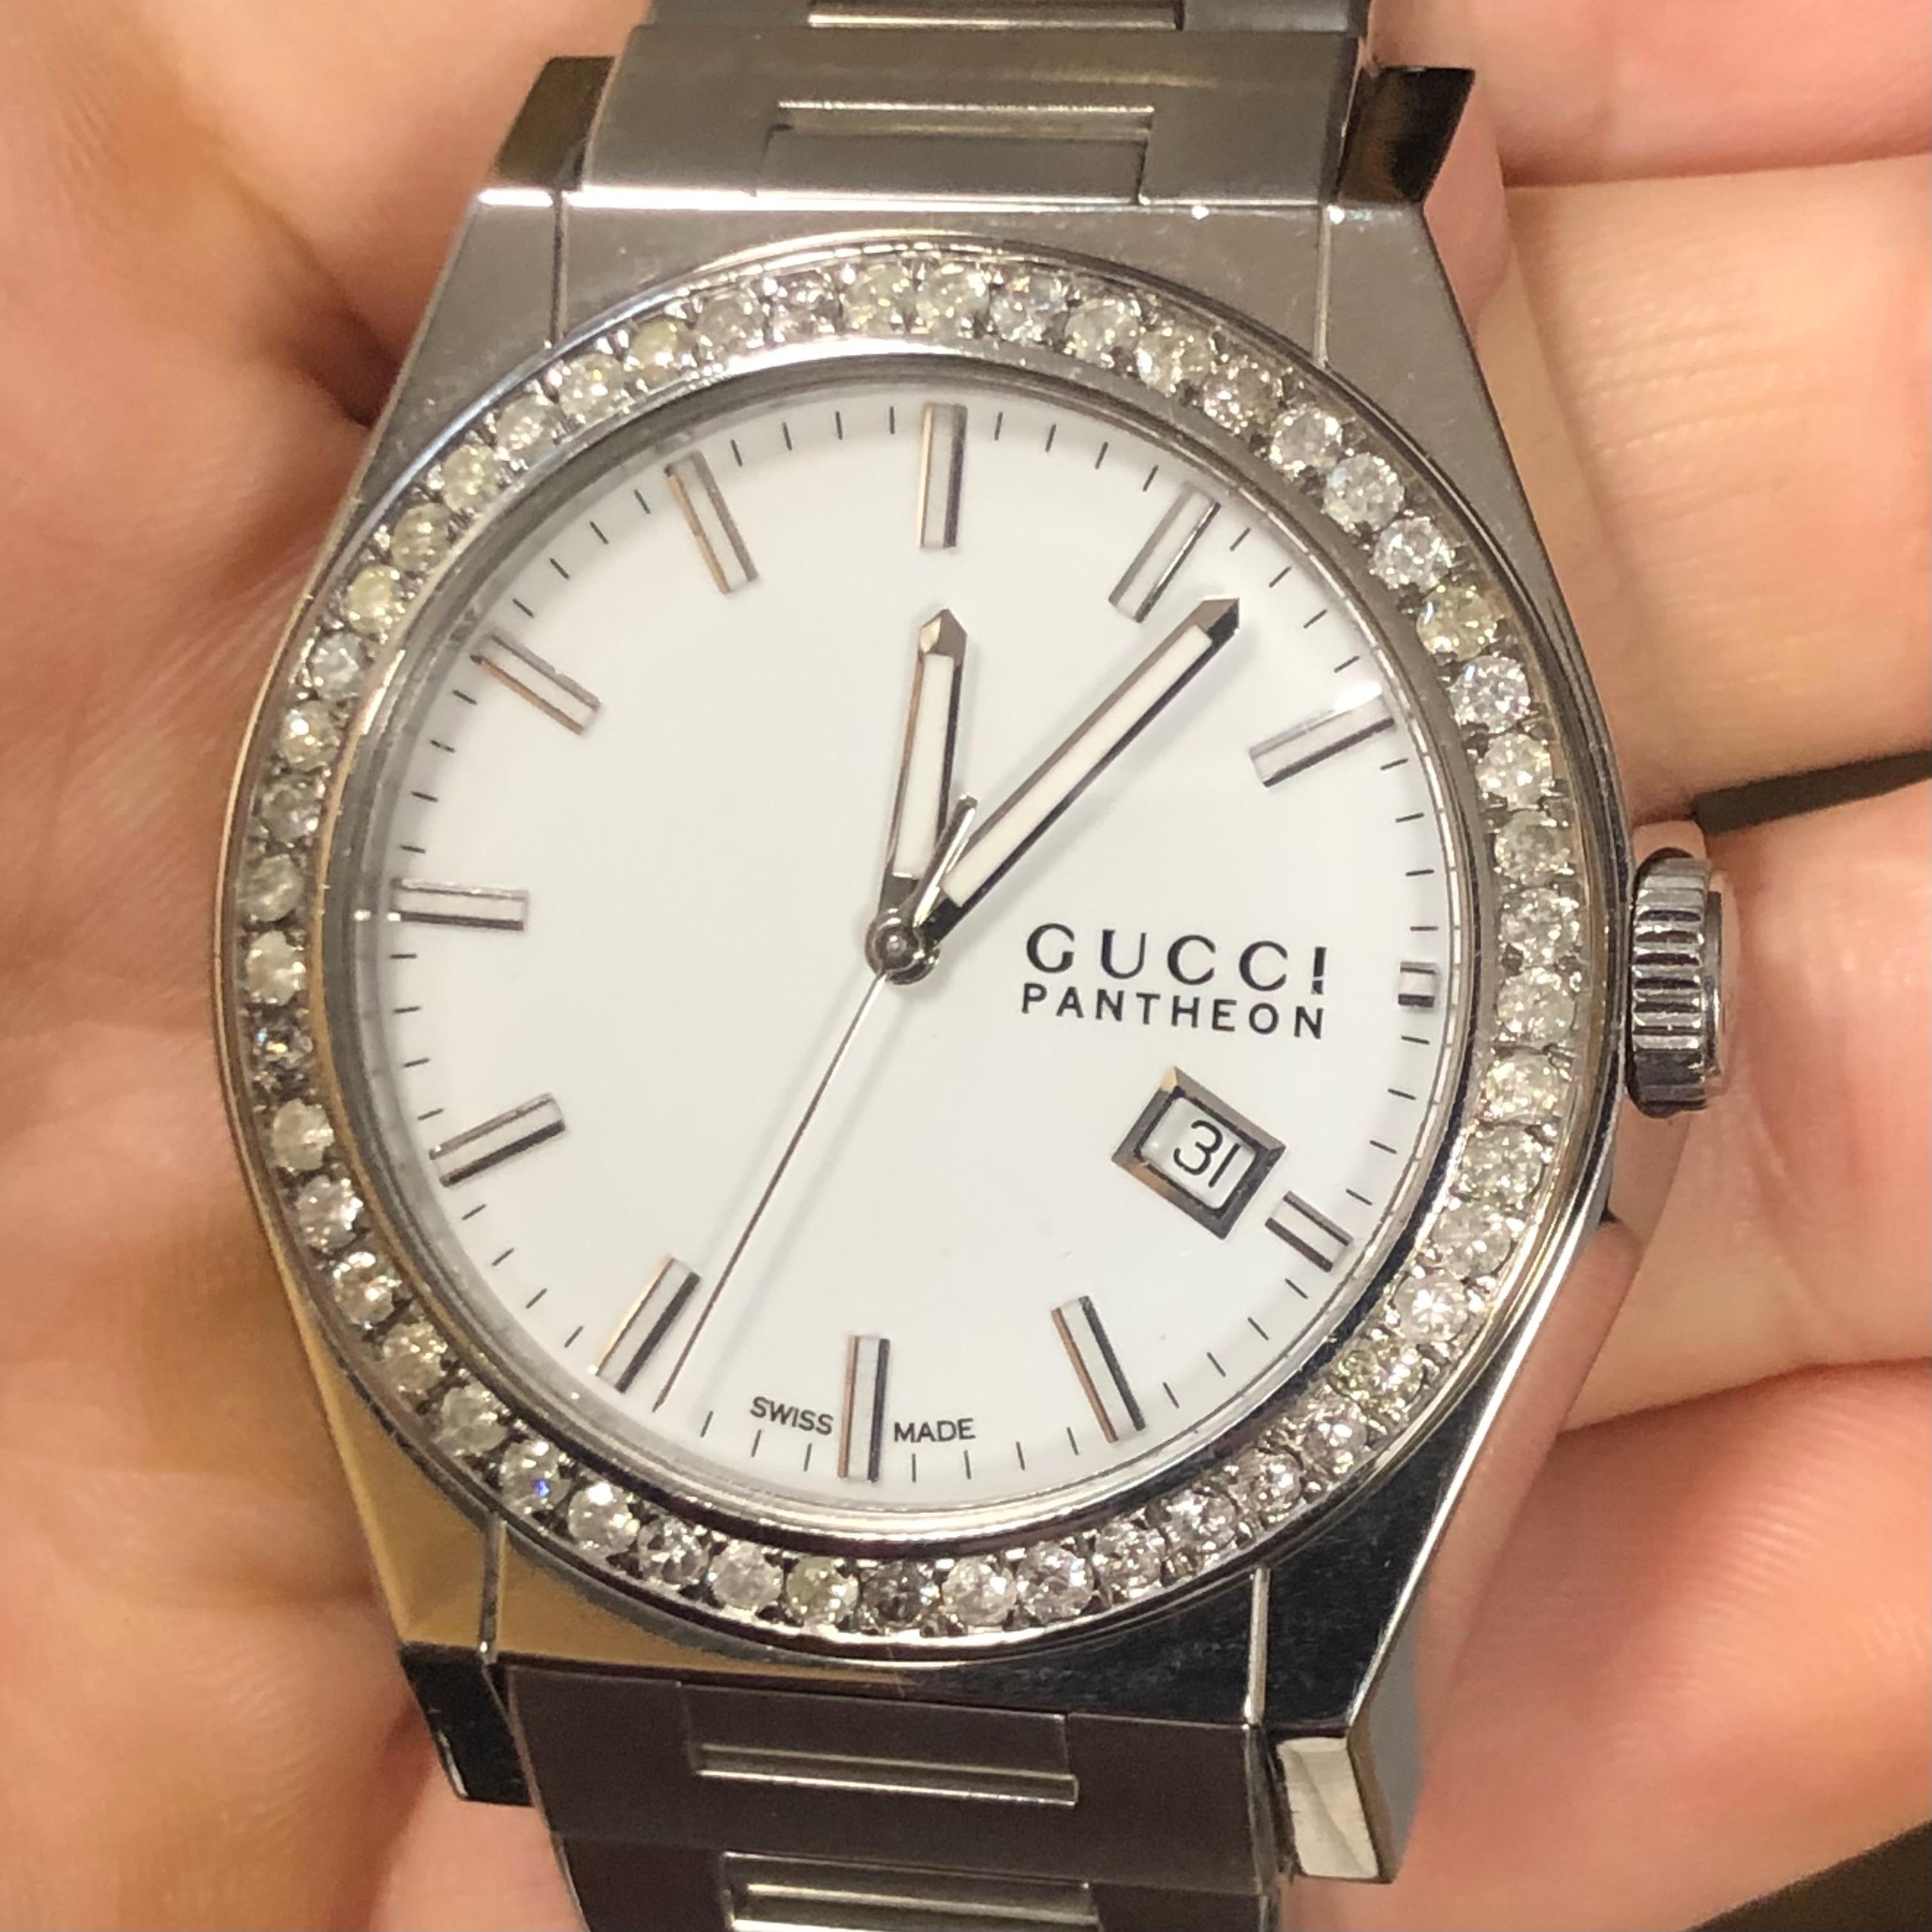 Custom Diamond Gucci Men's Pantheon Watch with box and booklet papers.

Original Gucci Bezel customized hand-set with approx. 2.00 carats of natural genuine earth-mined SI-I Diamonds. The diamonds shine beautifully in the light.

Custom Gucci Men’s